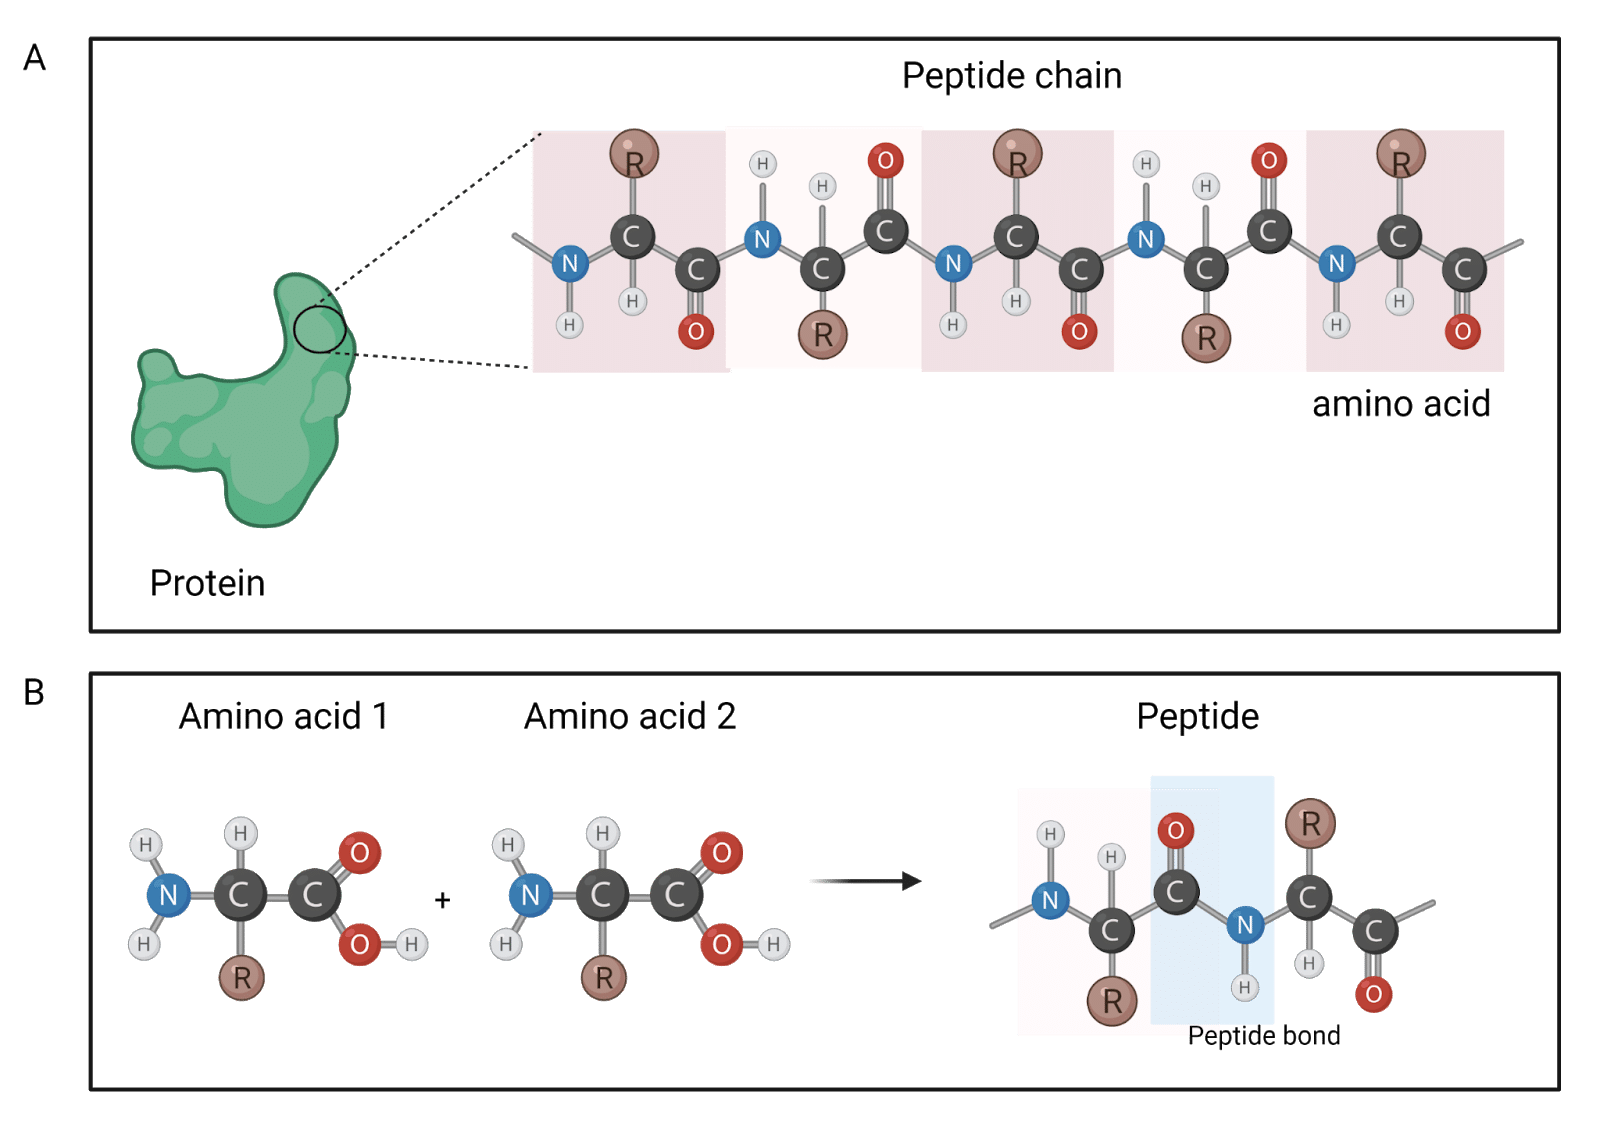 Illustration of protein building blocks. A protein is composed of peptide chains, each of which is made by a string of amino acids (A). Amino acids have an R group (carbon chain), and two functional groups: an amino group, and a carboxylic group. When two amino acids join together through a reaction between their carboxyl and amino groups, they form a peptide bond.